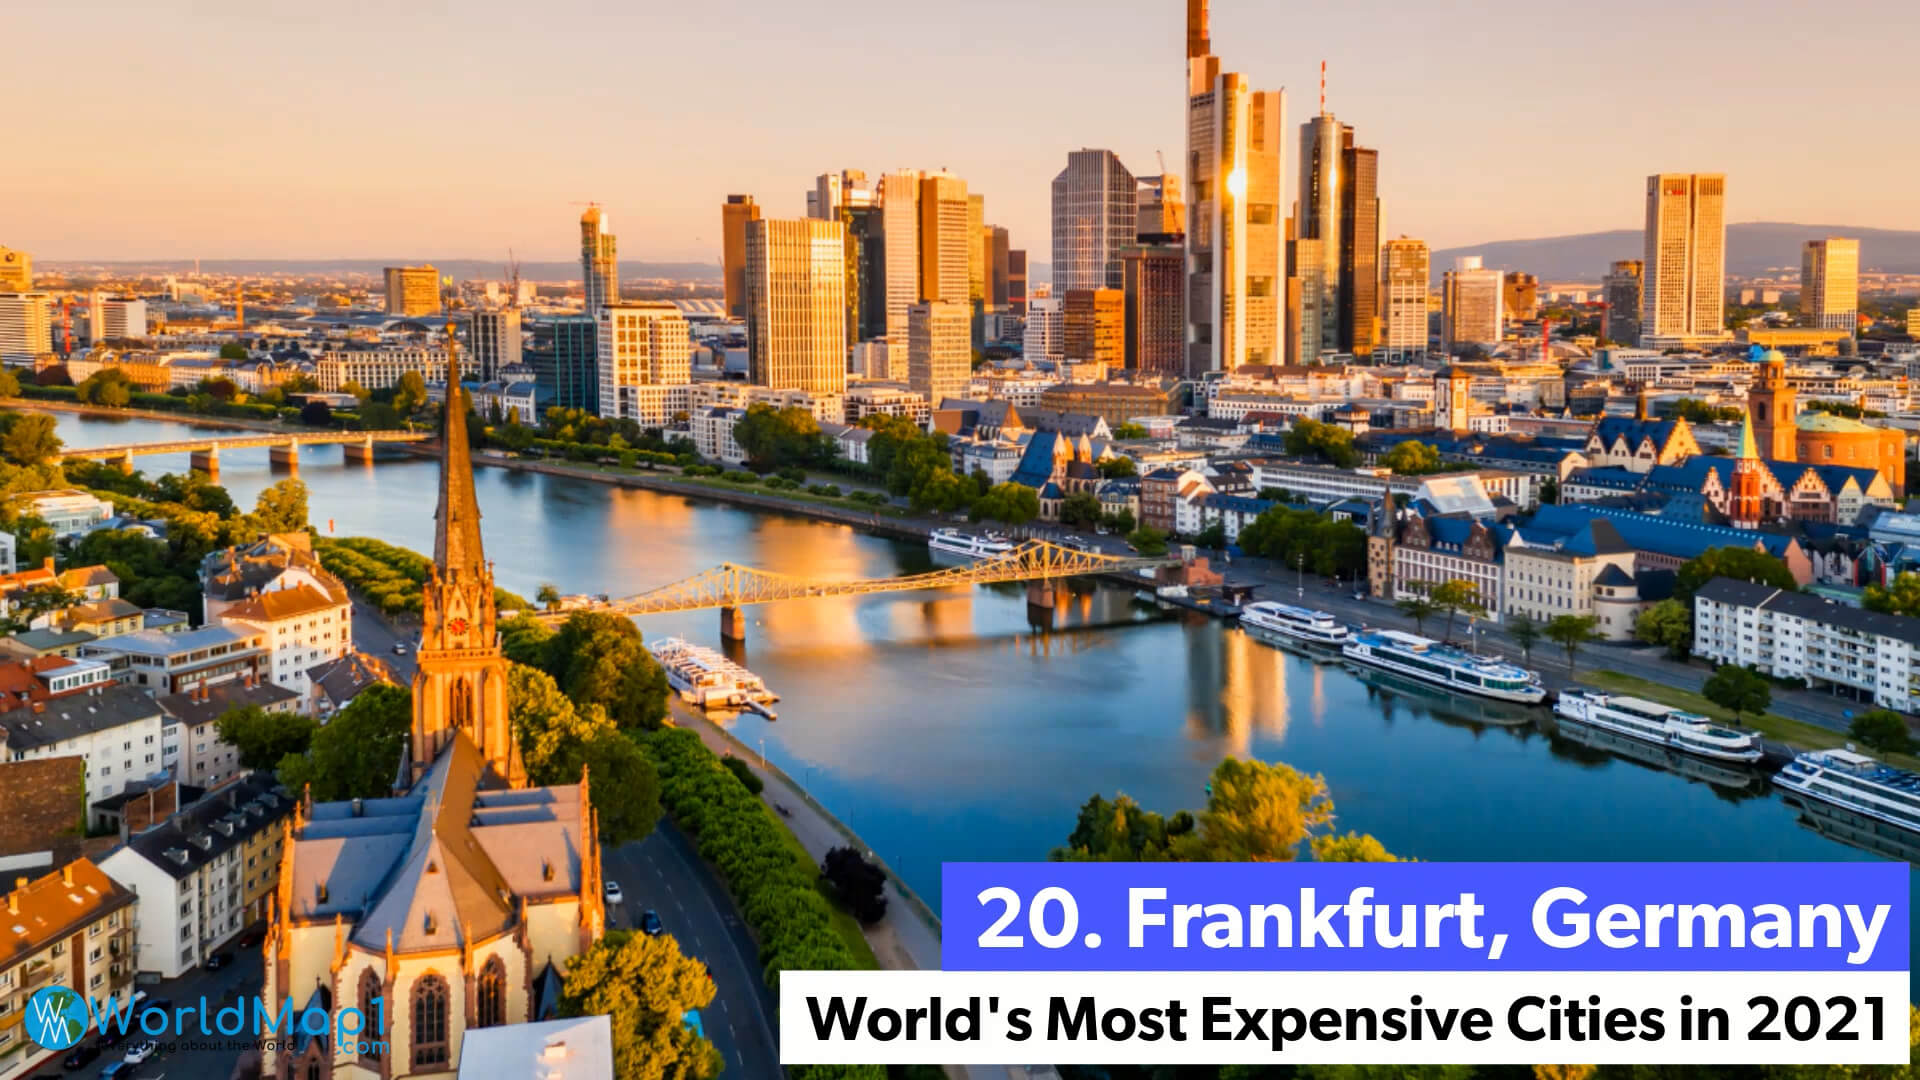 World's Most Expensive Cities - Frankfurt, Germany